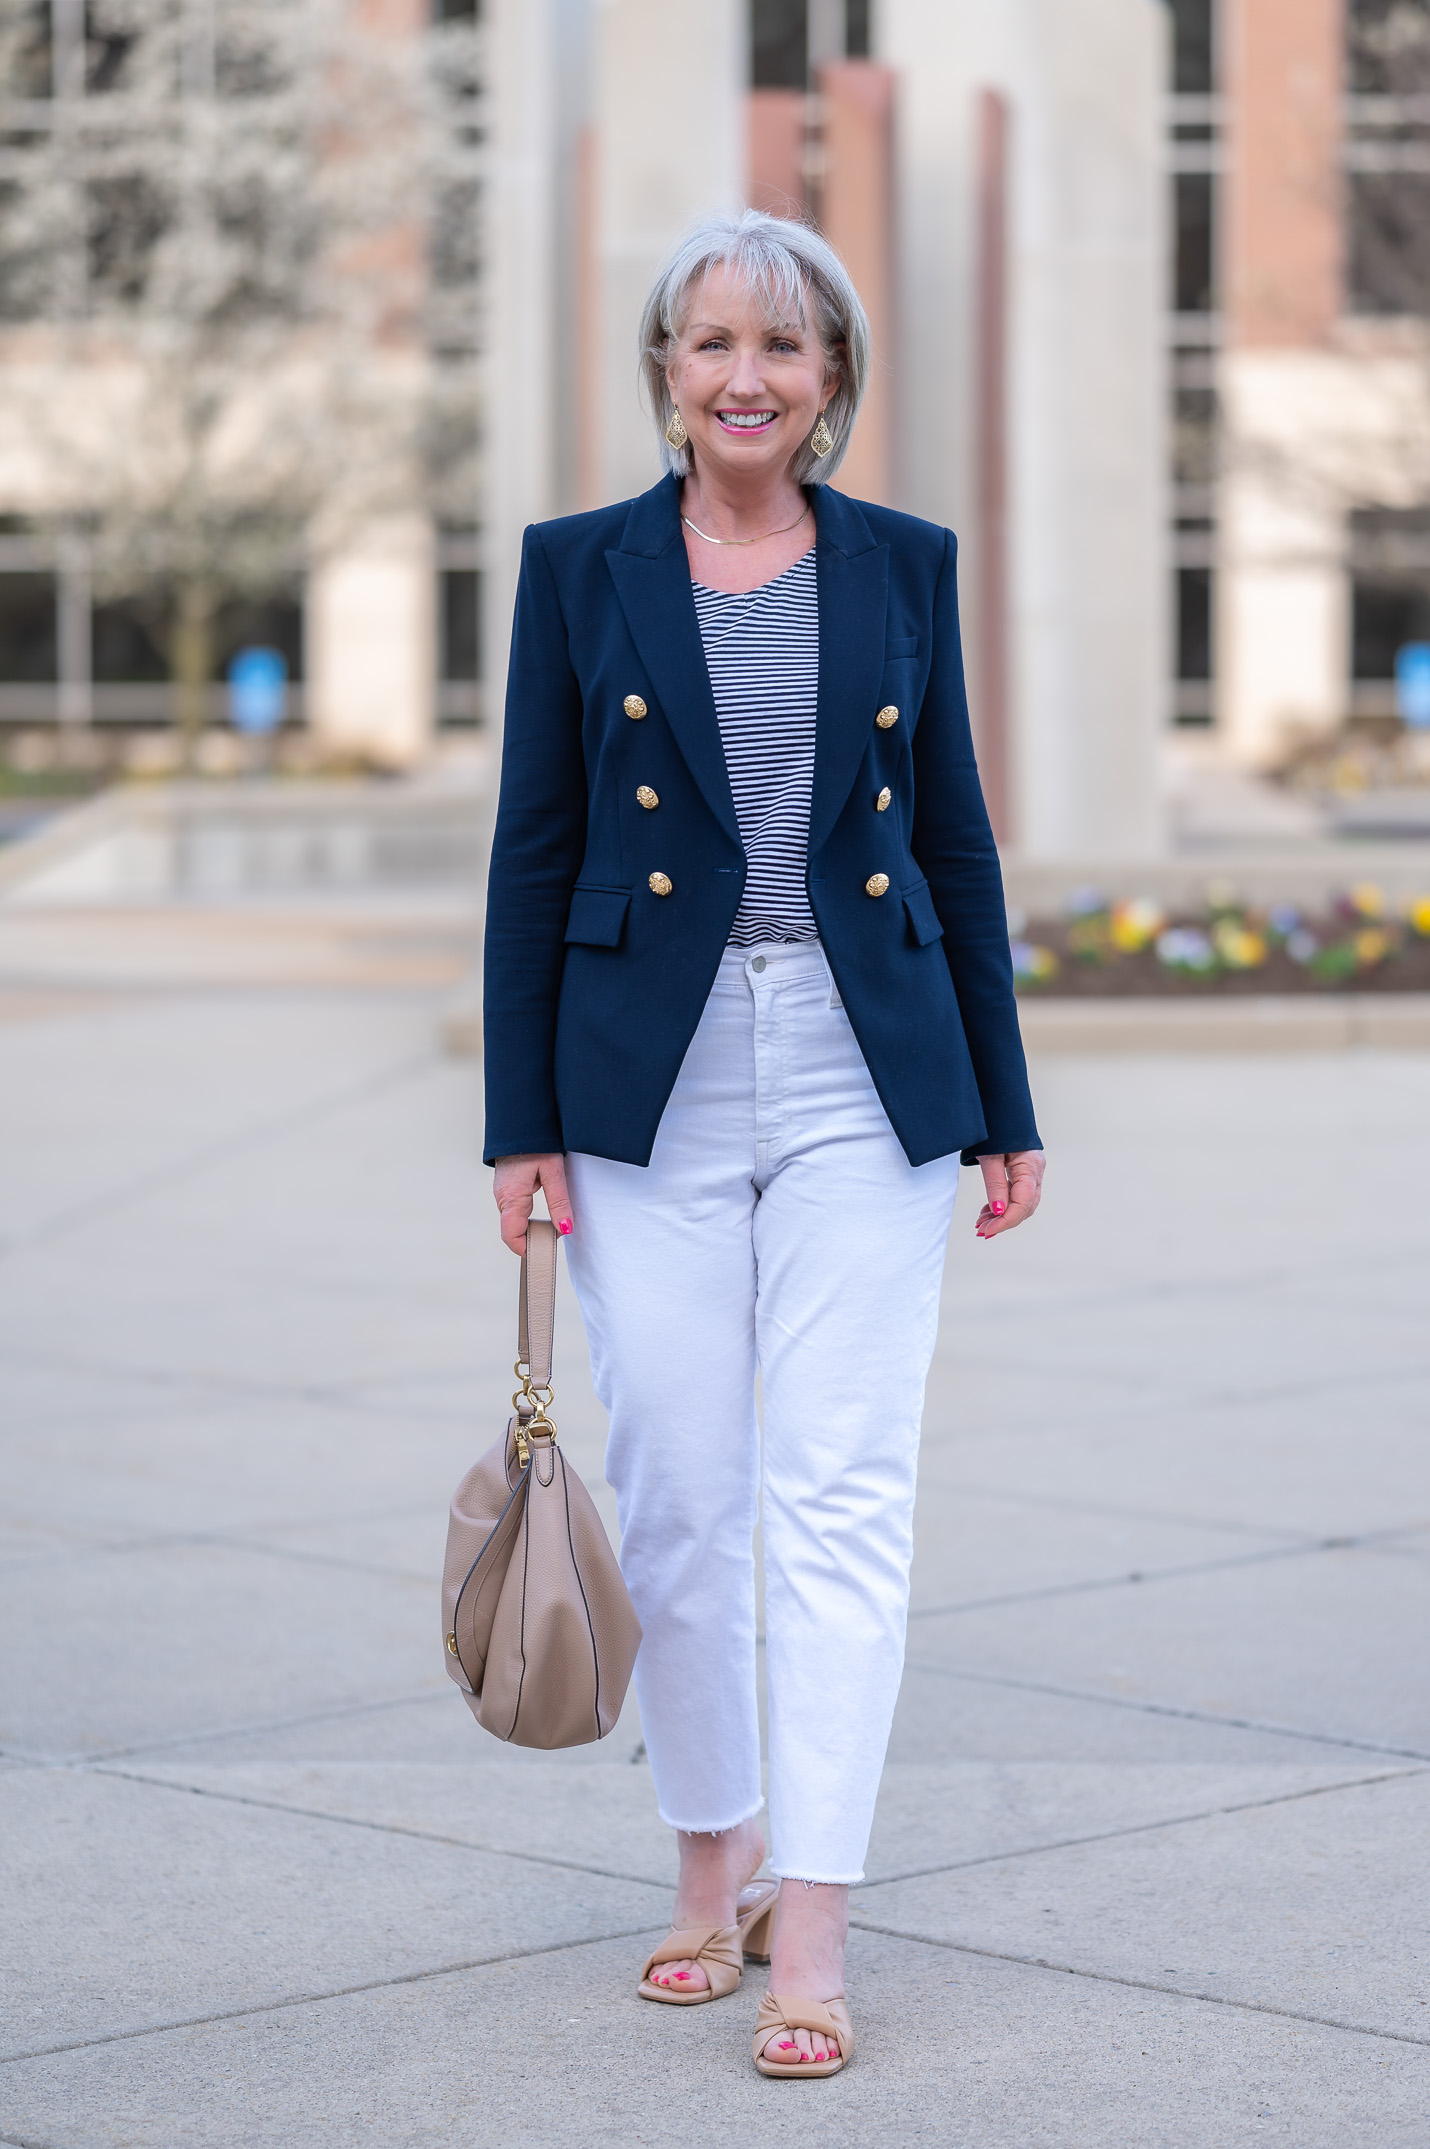 5 Wardrobe Essentials for Great Spring Outfits